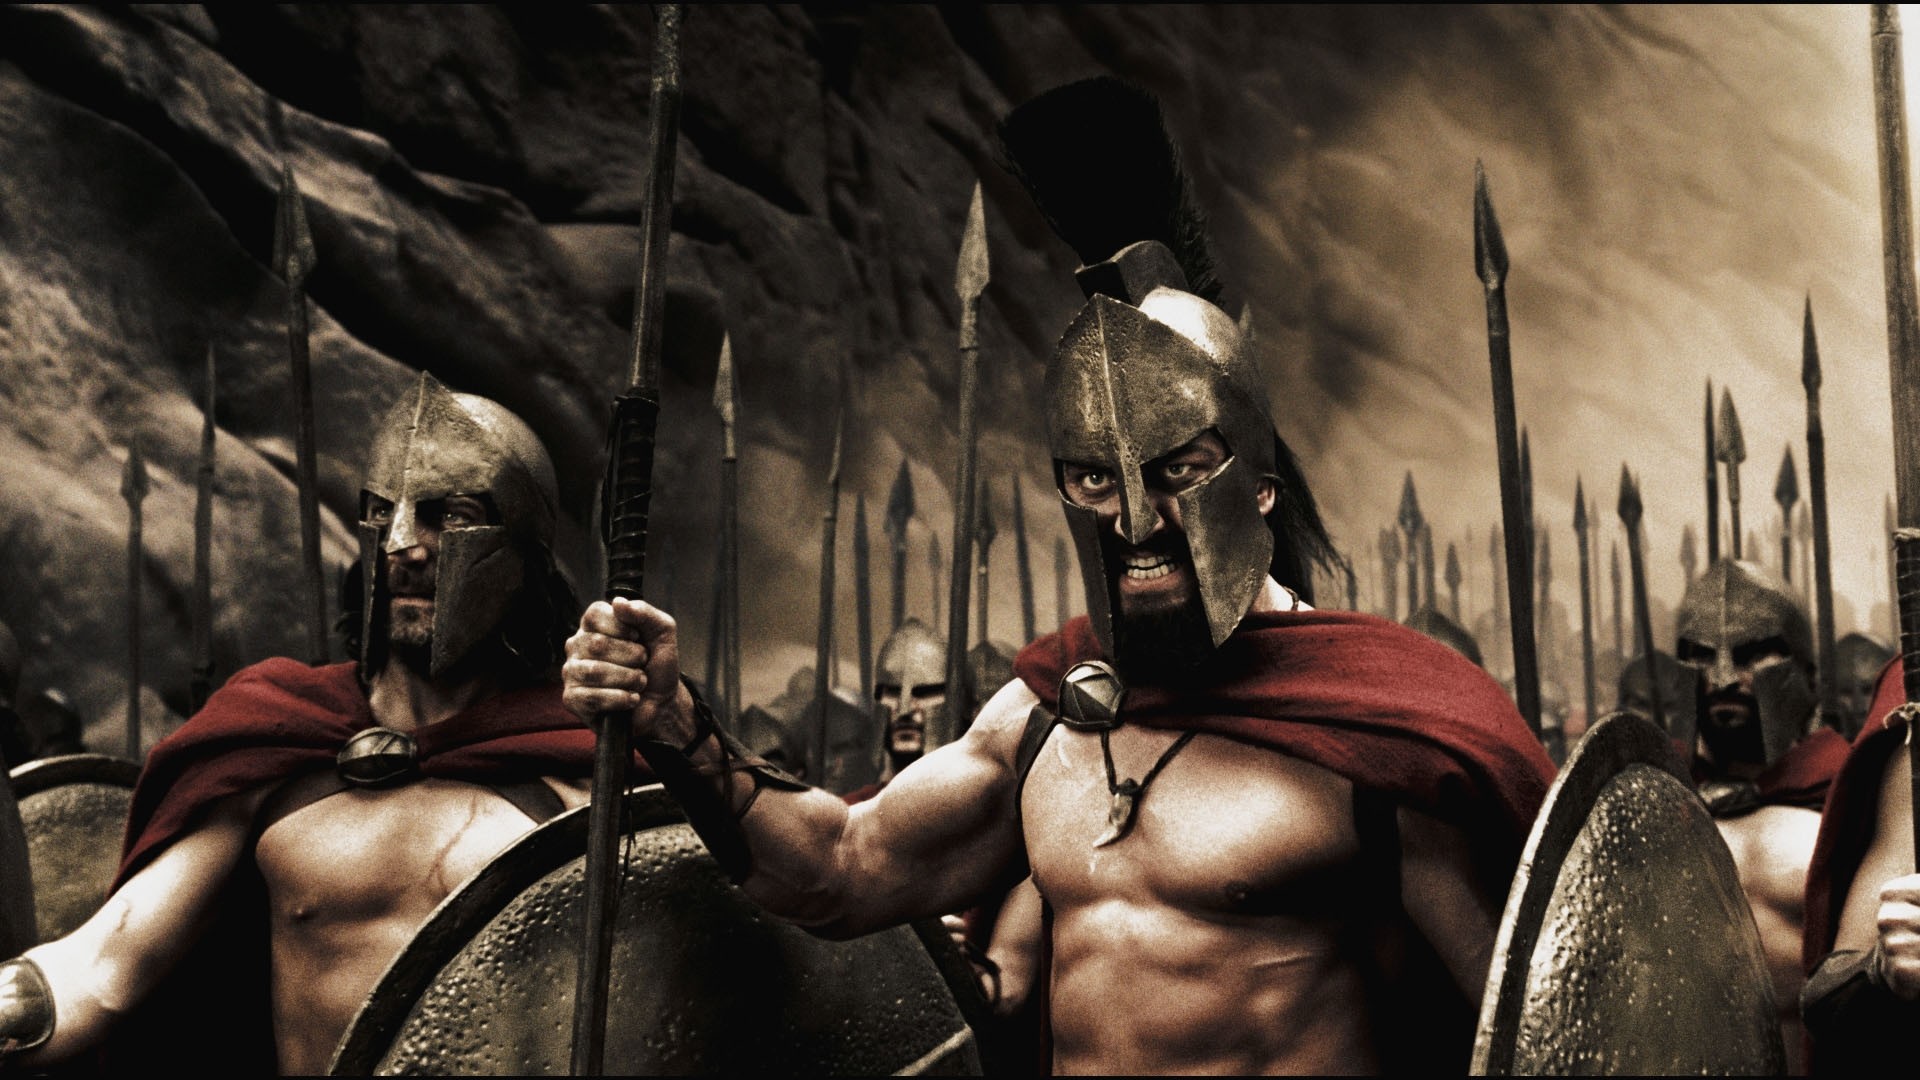 1920x1080 Warriors Spartans 300 Killers Strong Man [] Need #iPhone #6S #Plus